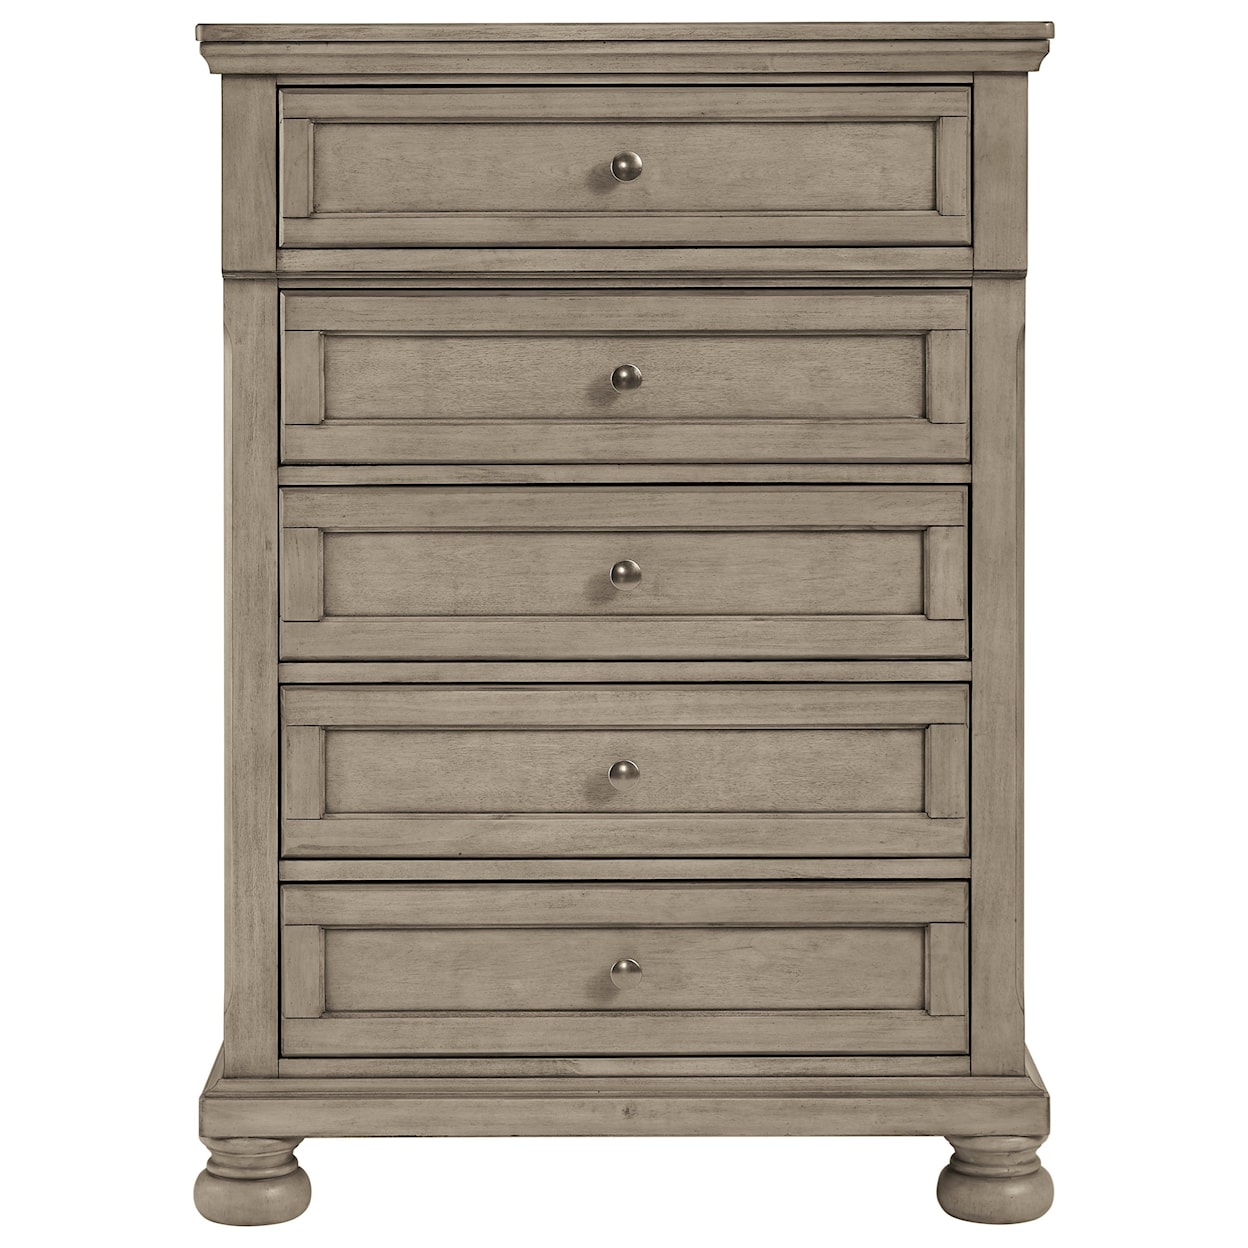 Signature Design by Ashley Lettner 5-Drawer Chest